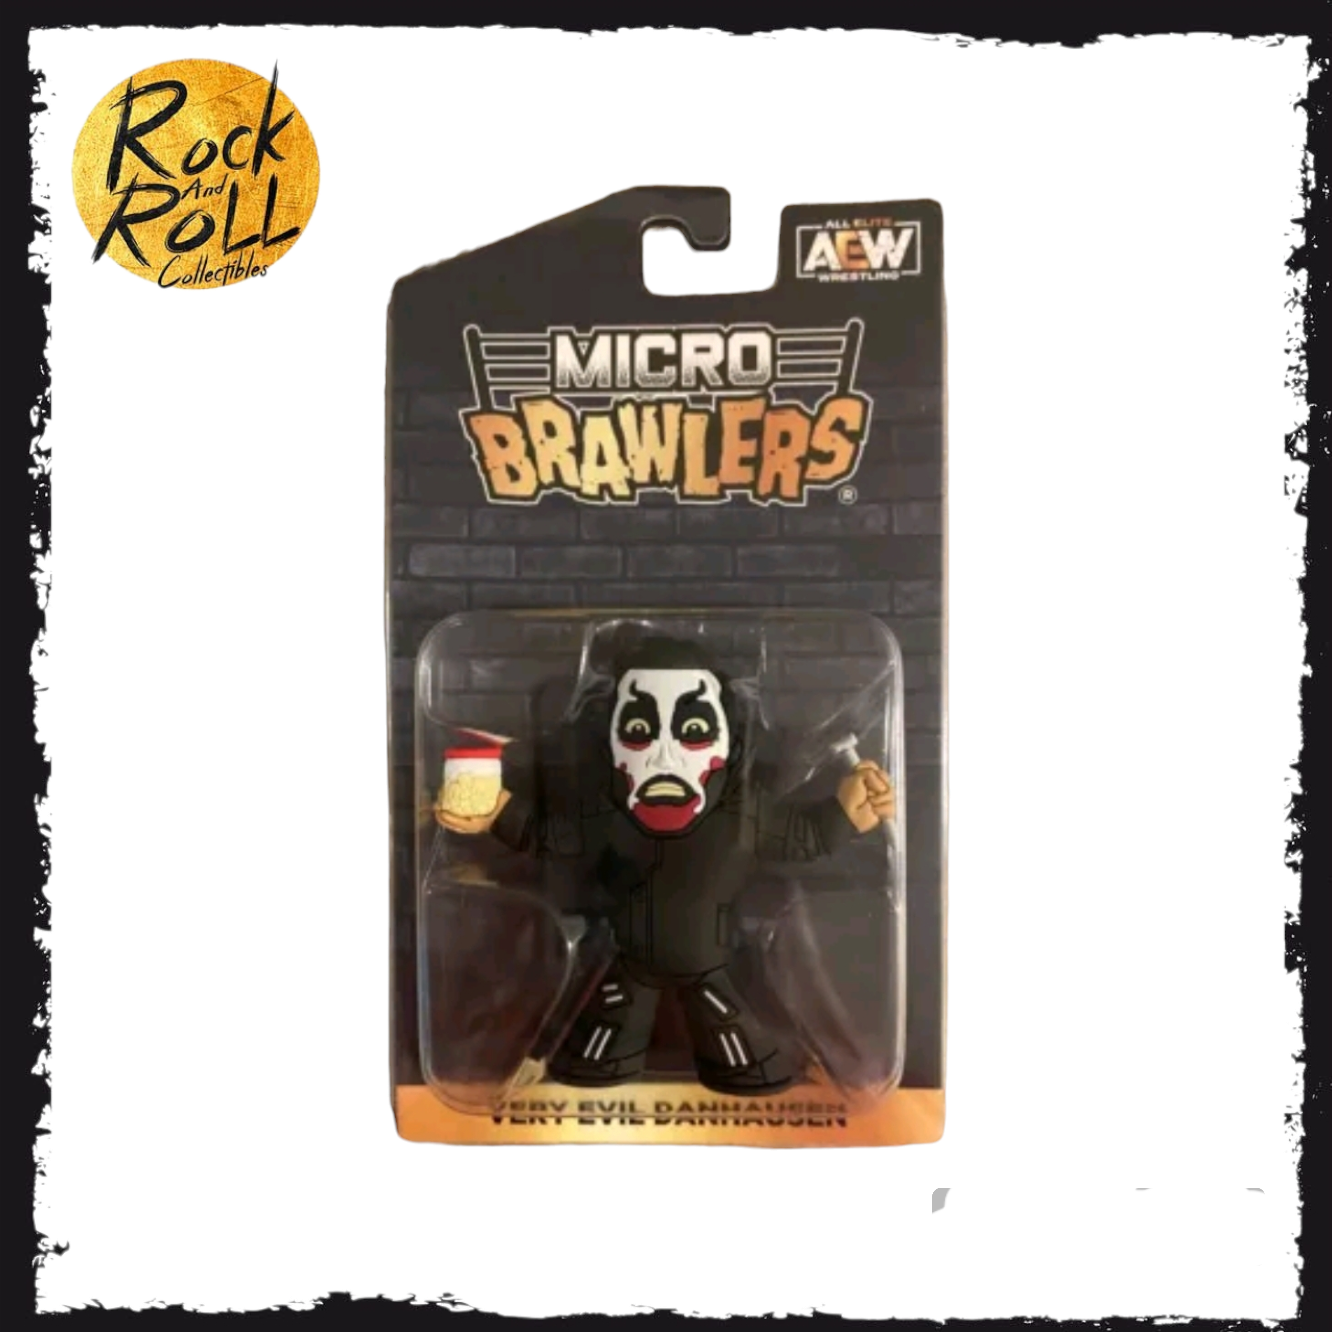 Very Evil Danhausen Micro Brawler – rock and roll collectibles